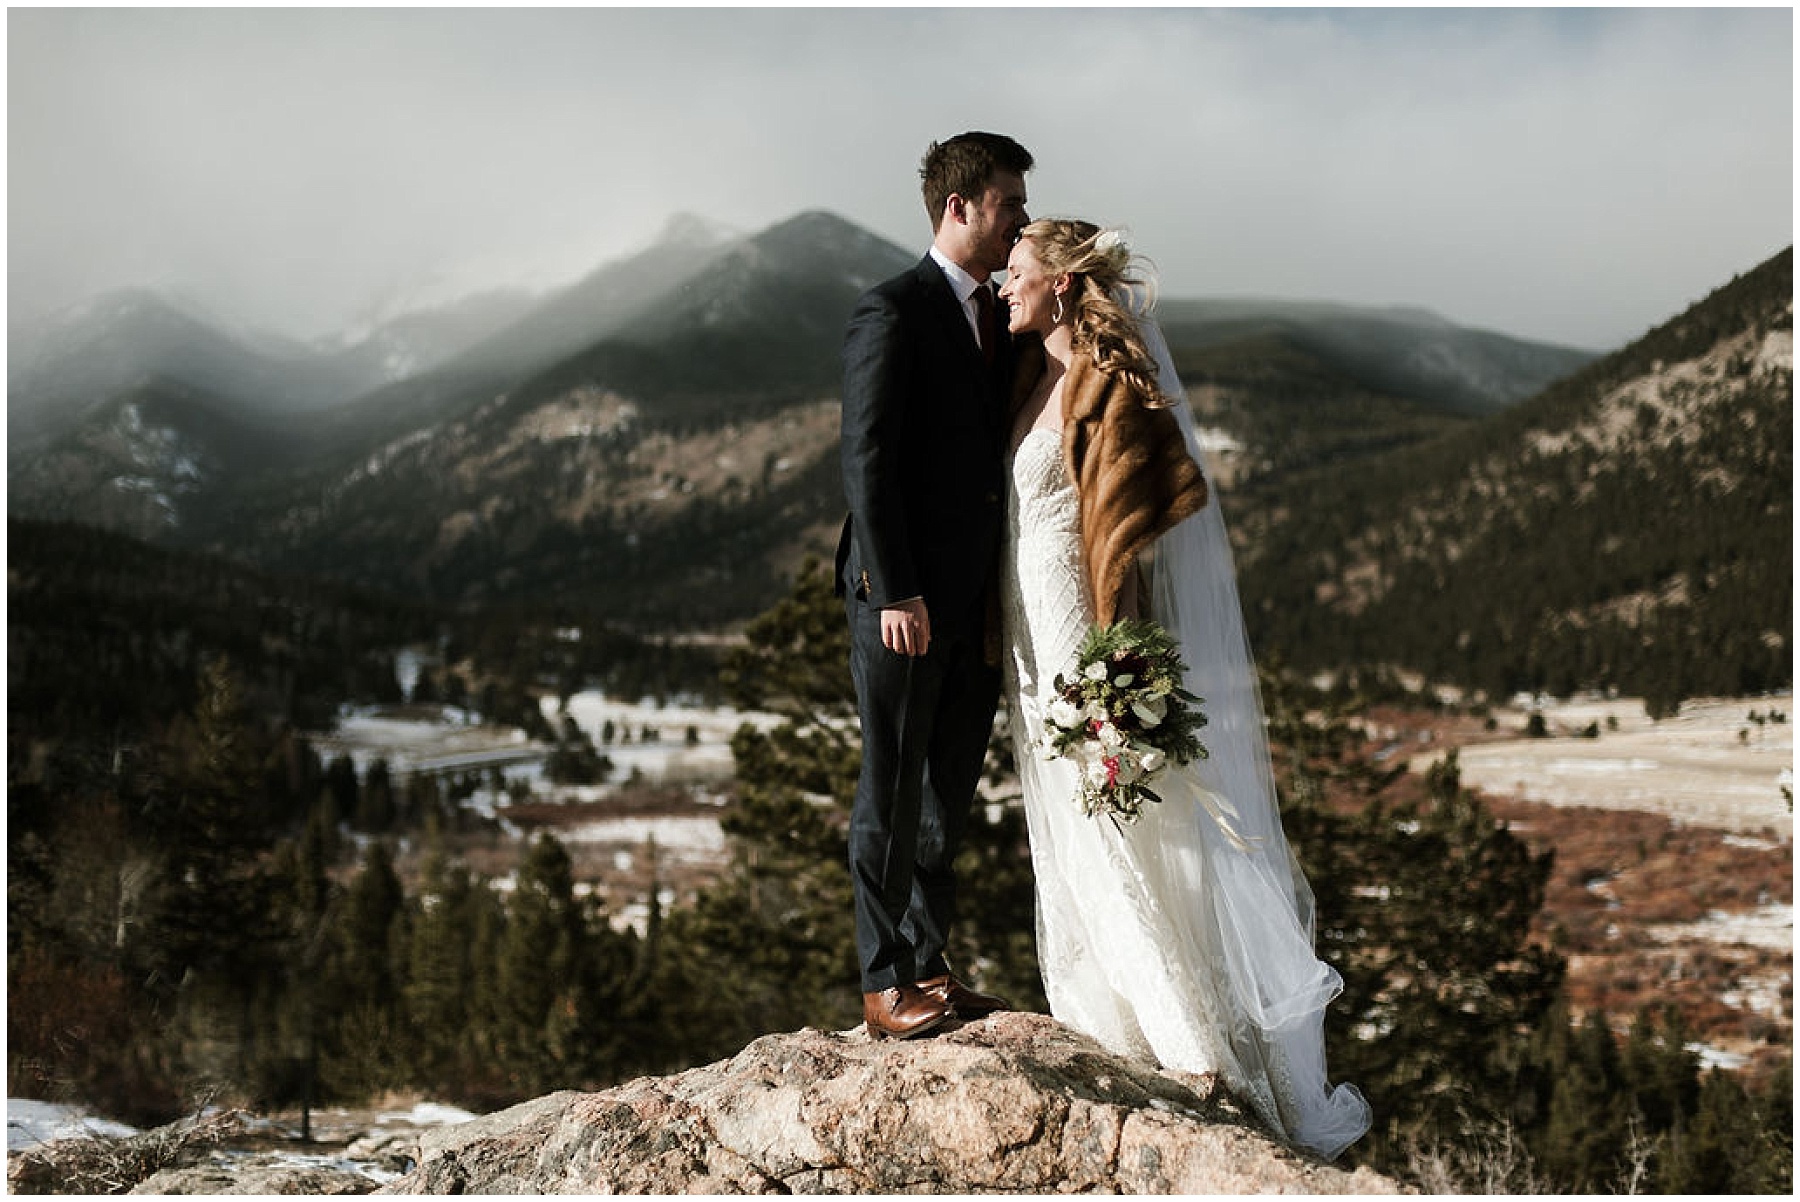 Katesalleyphotography-195_Haley and Dan get married in Estes Park.jpg